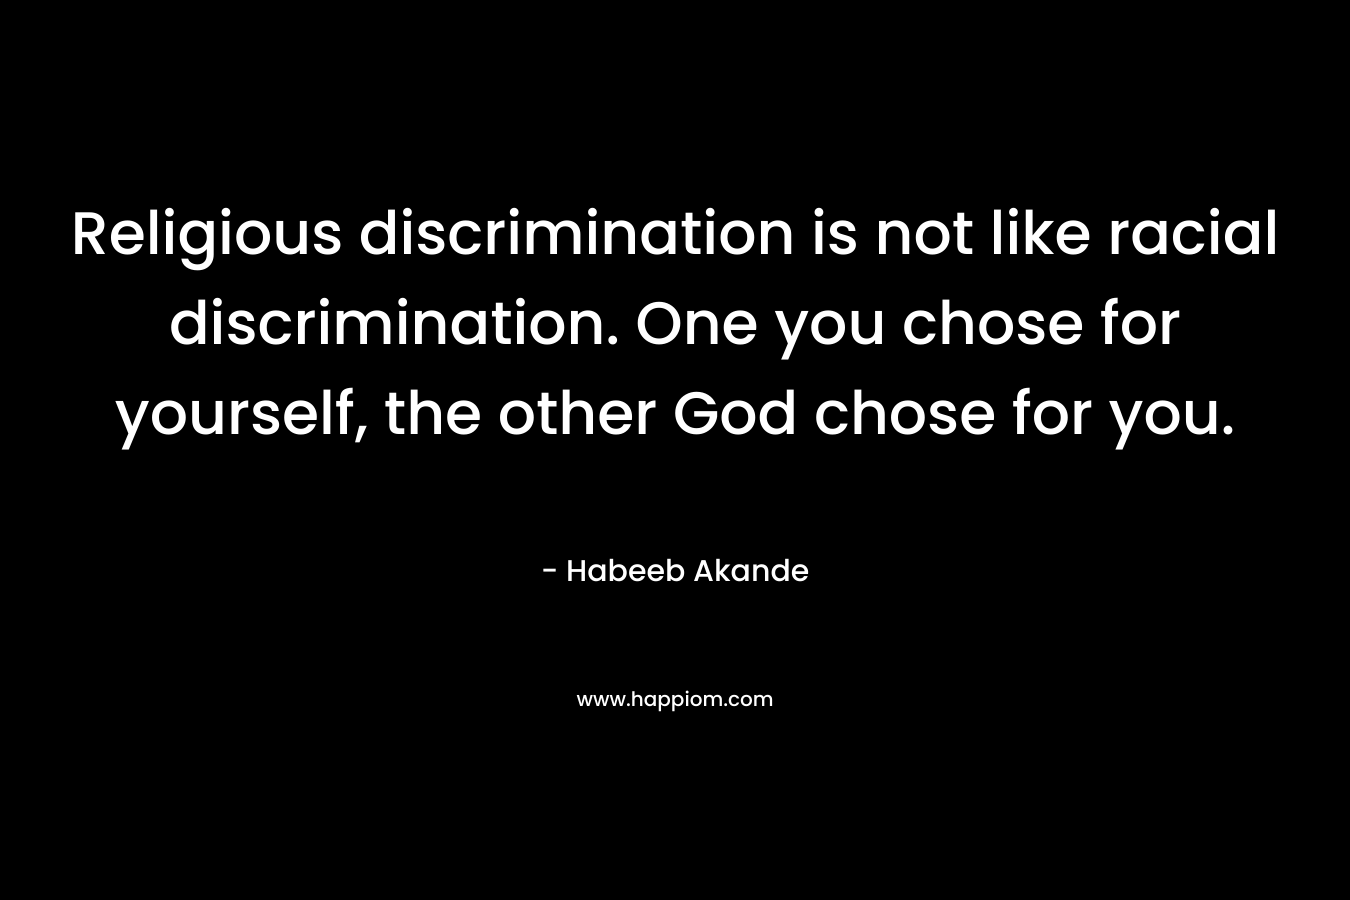 Religious discrimination is not like racial discrimination. One you chose for yourself, the other God chose for you. – Habeeb Akande